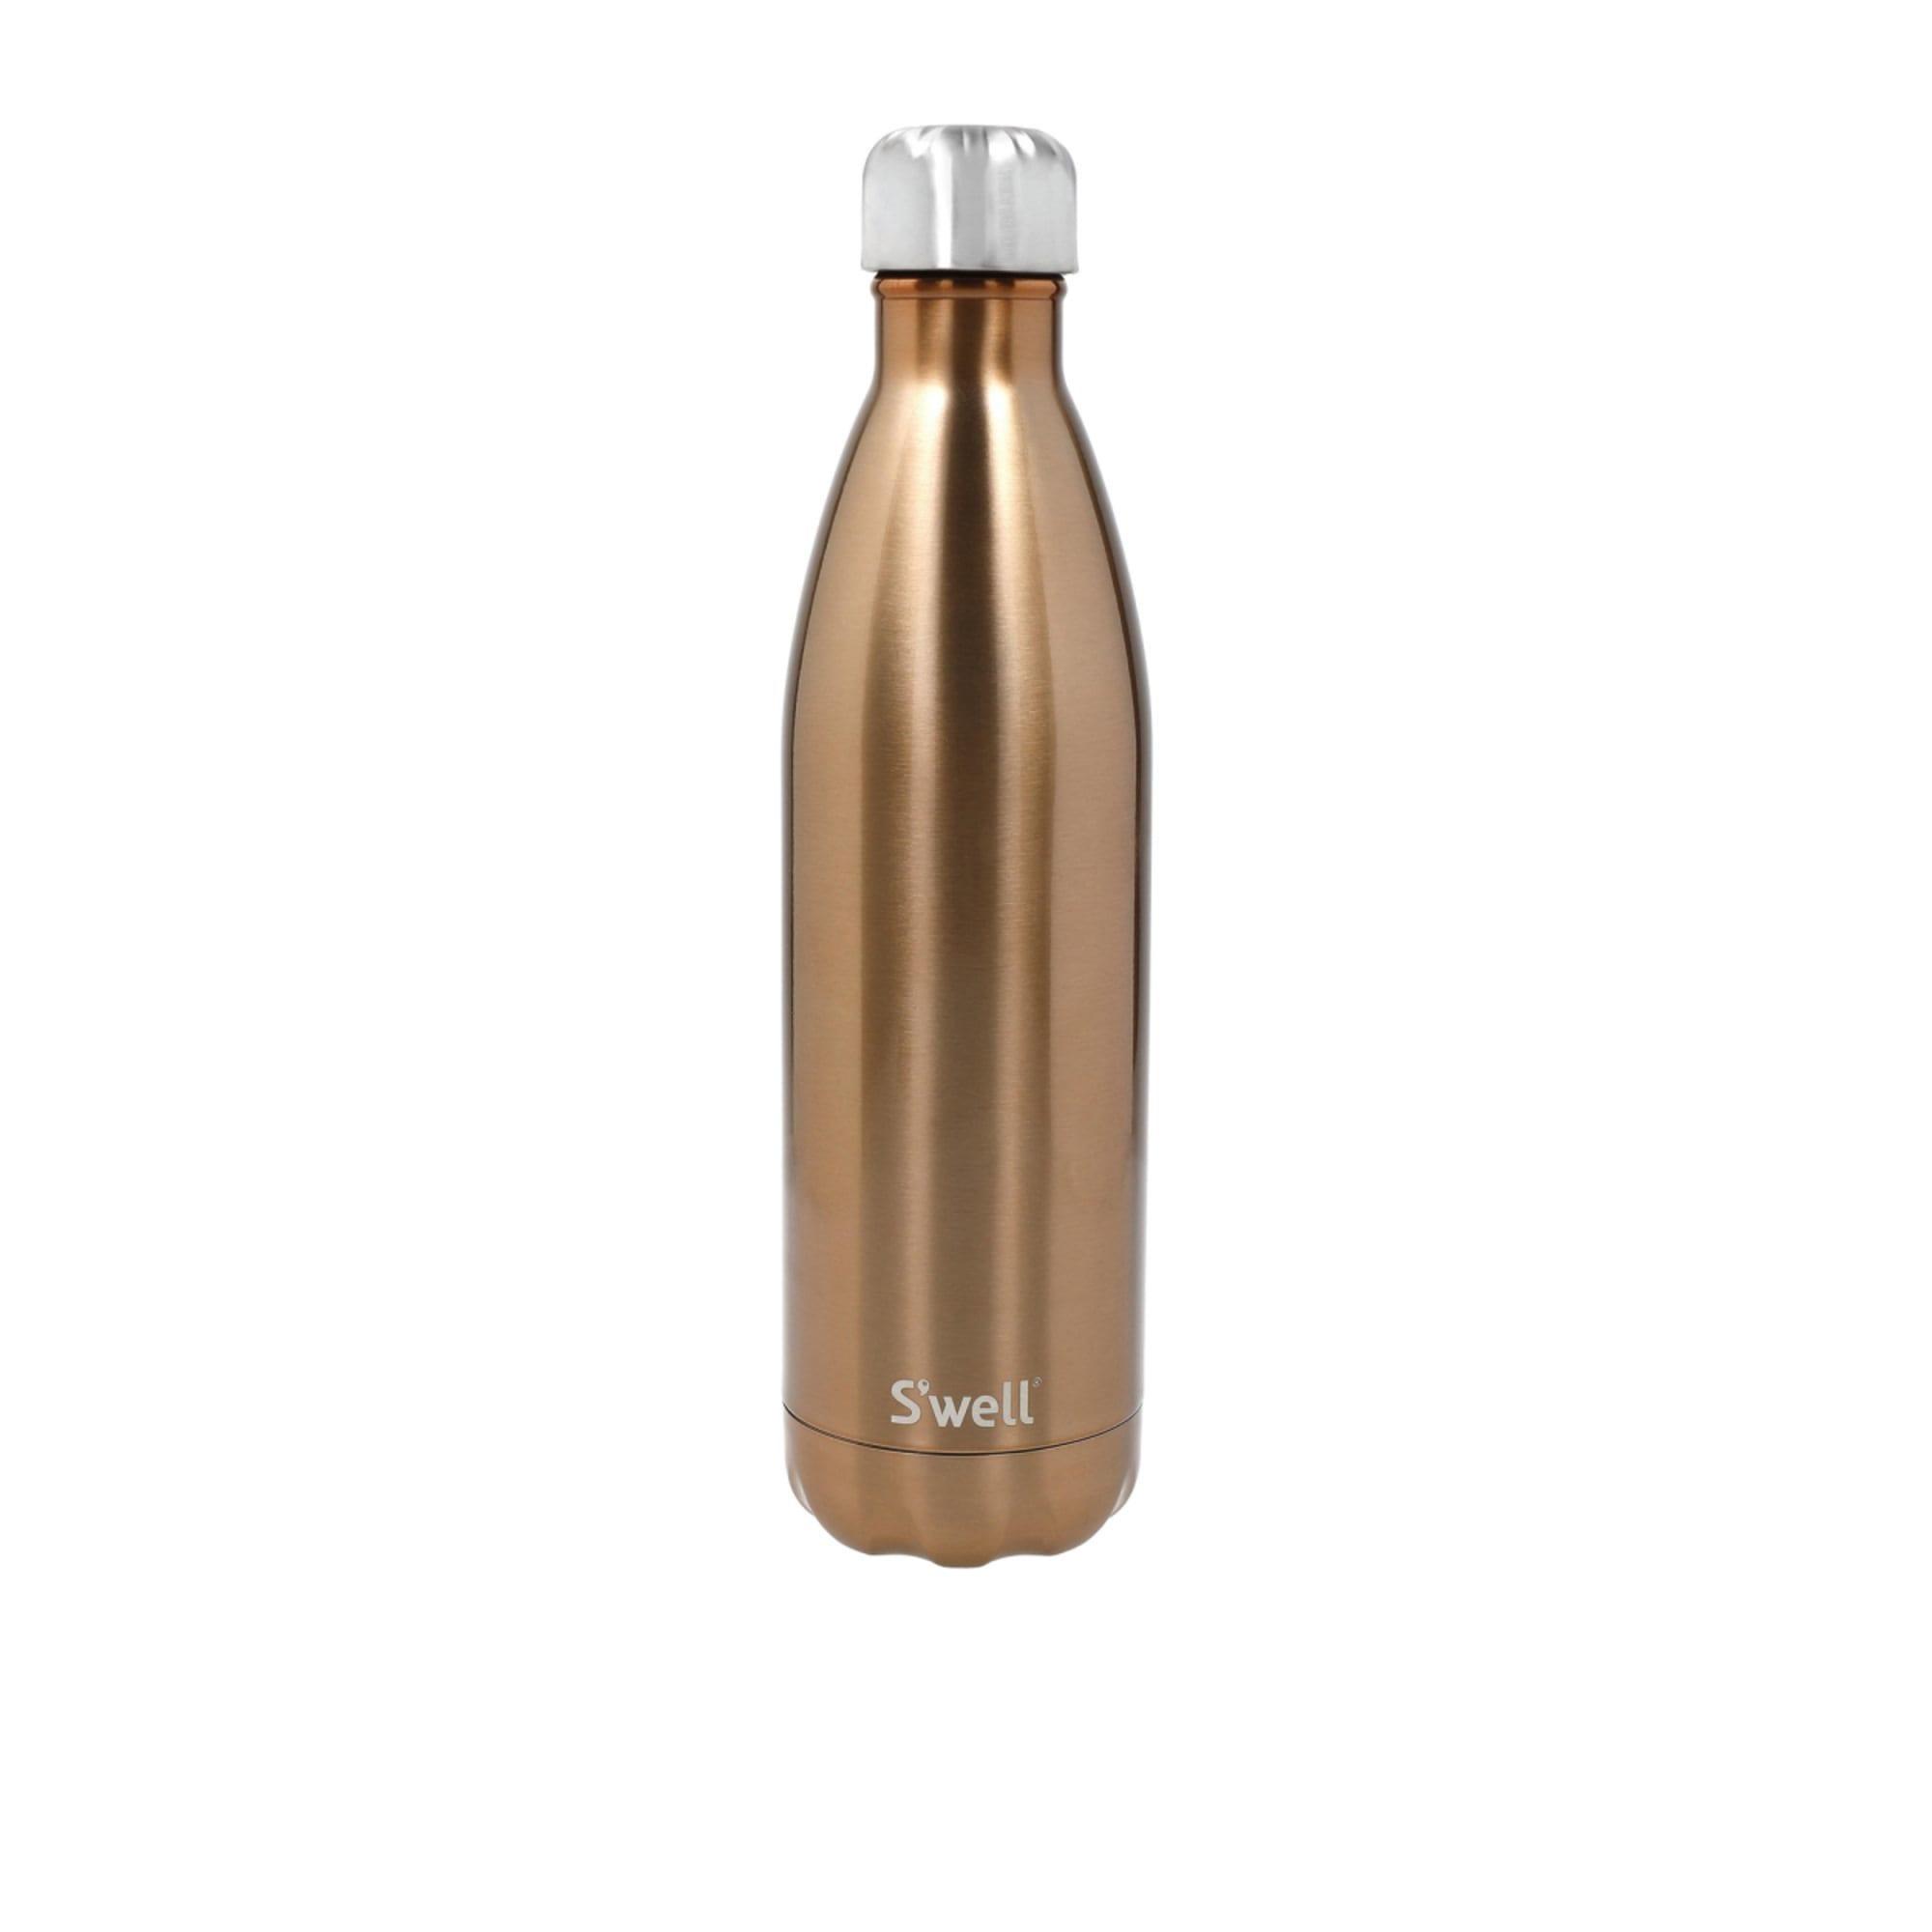 S'Well Insulated Bottle 750ml Pyrite Image 1